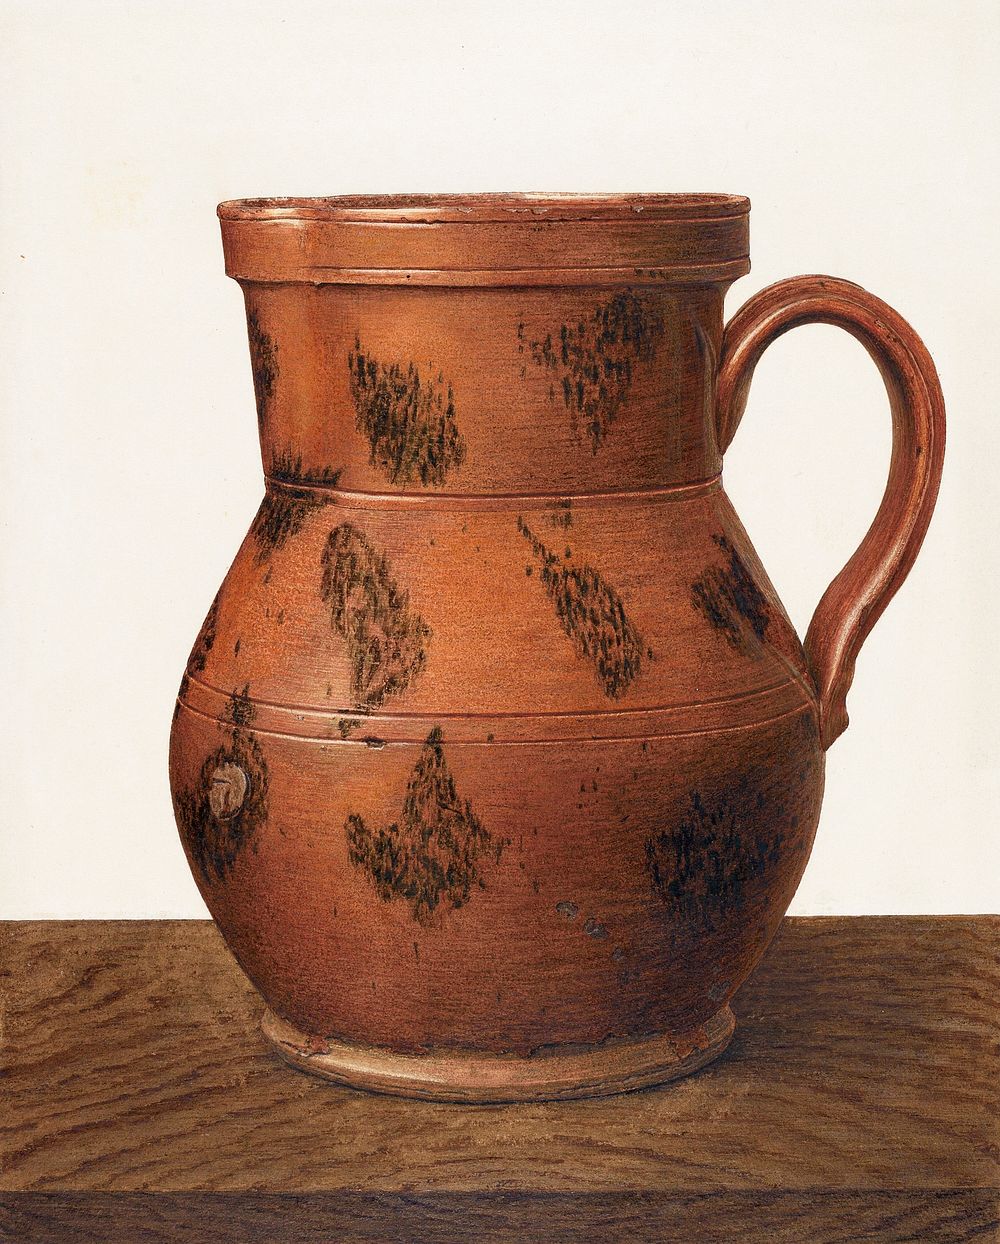 Water Pitcher (1935&ndash;1942) by unknown American 20th Century artist. Original from The National Gallery of Art.…